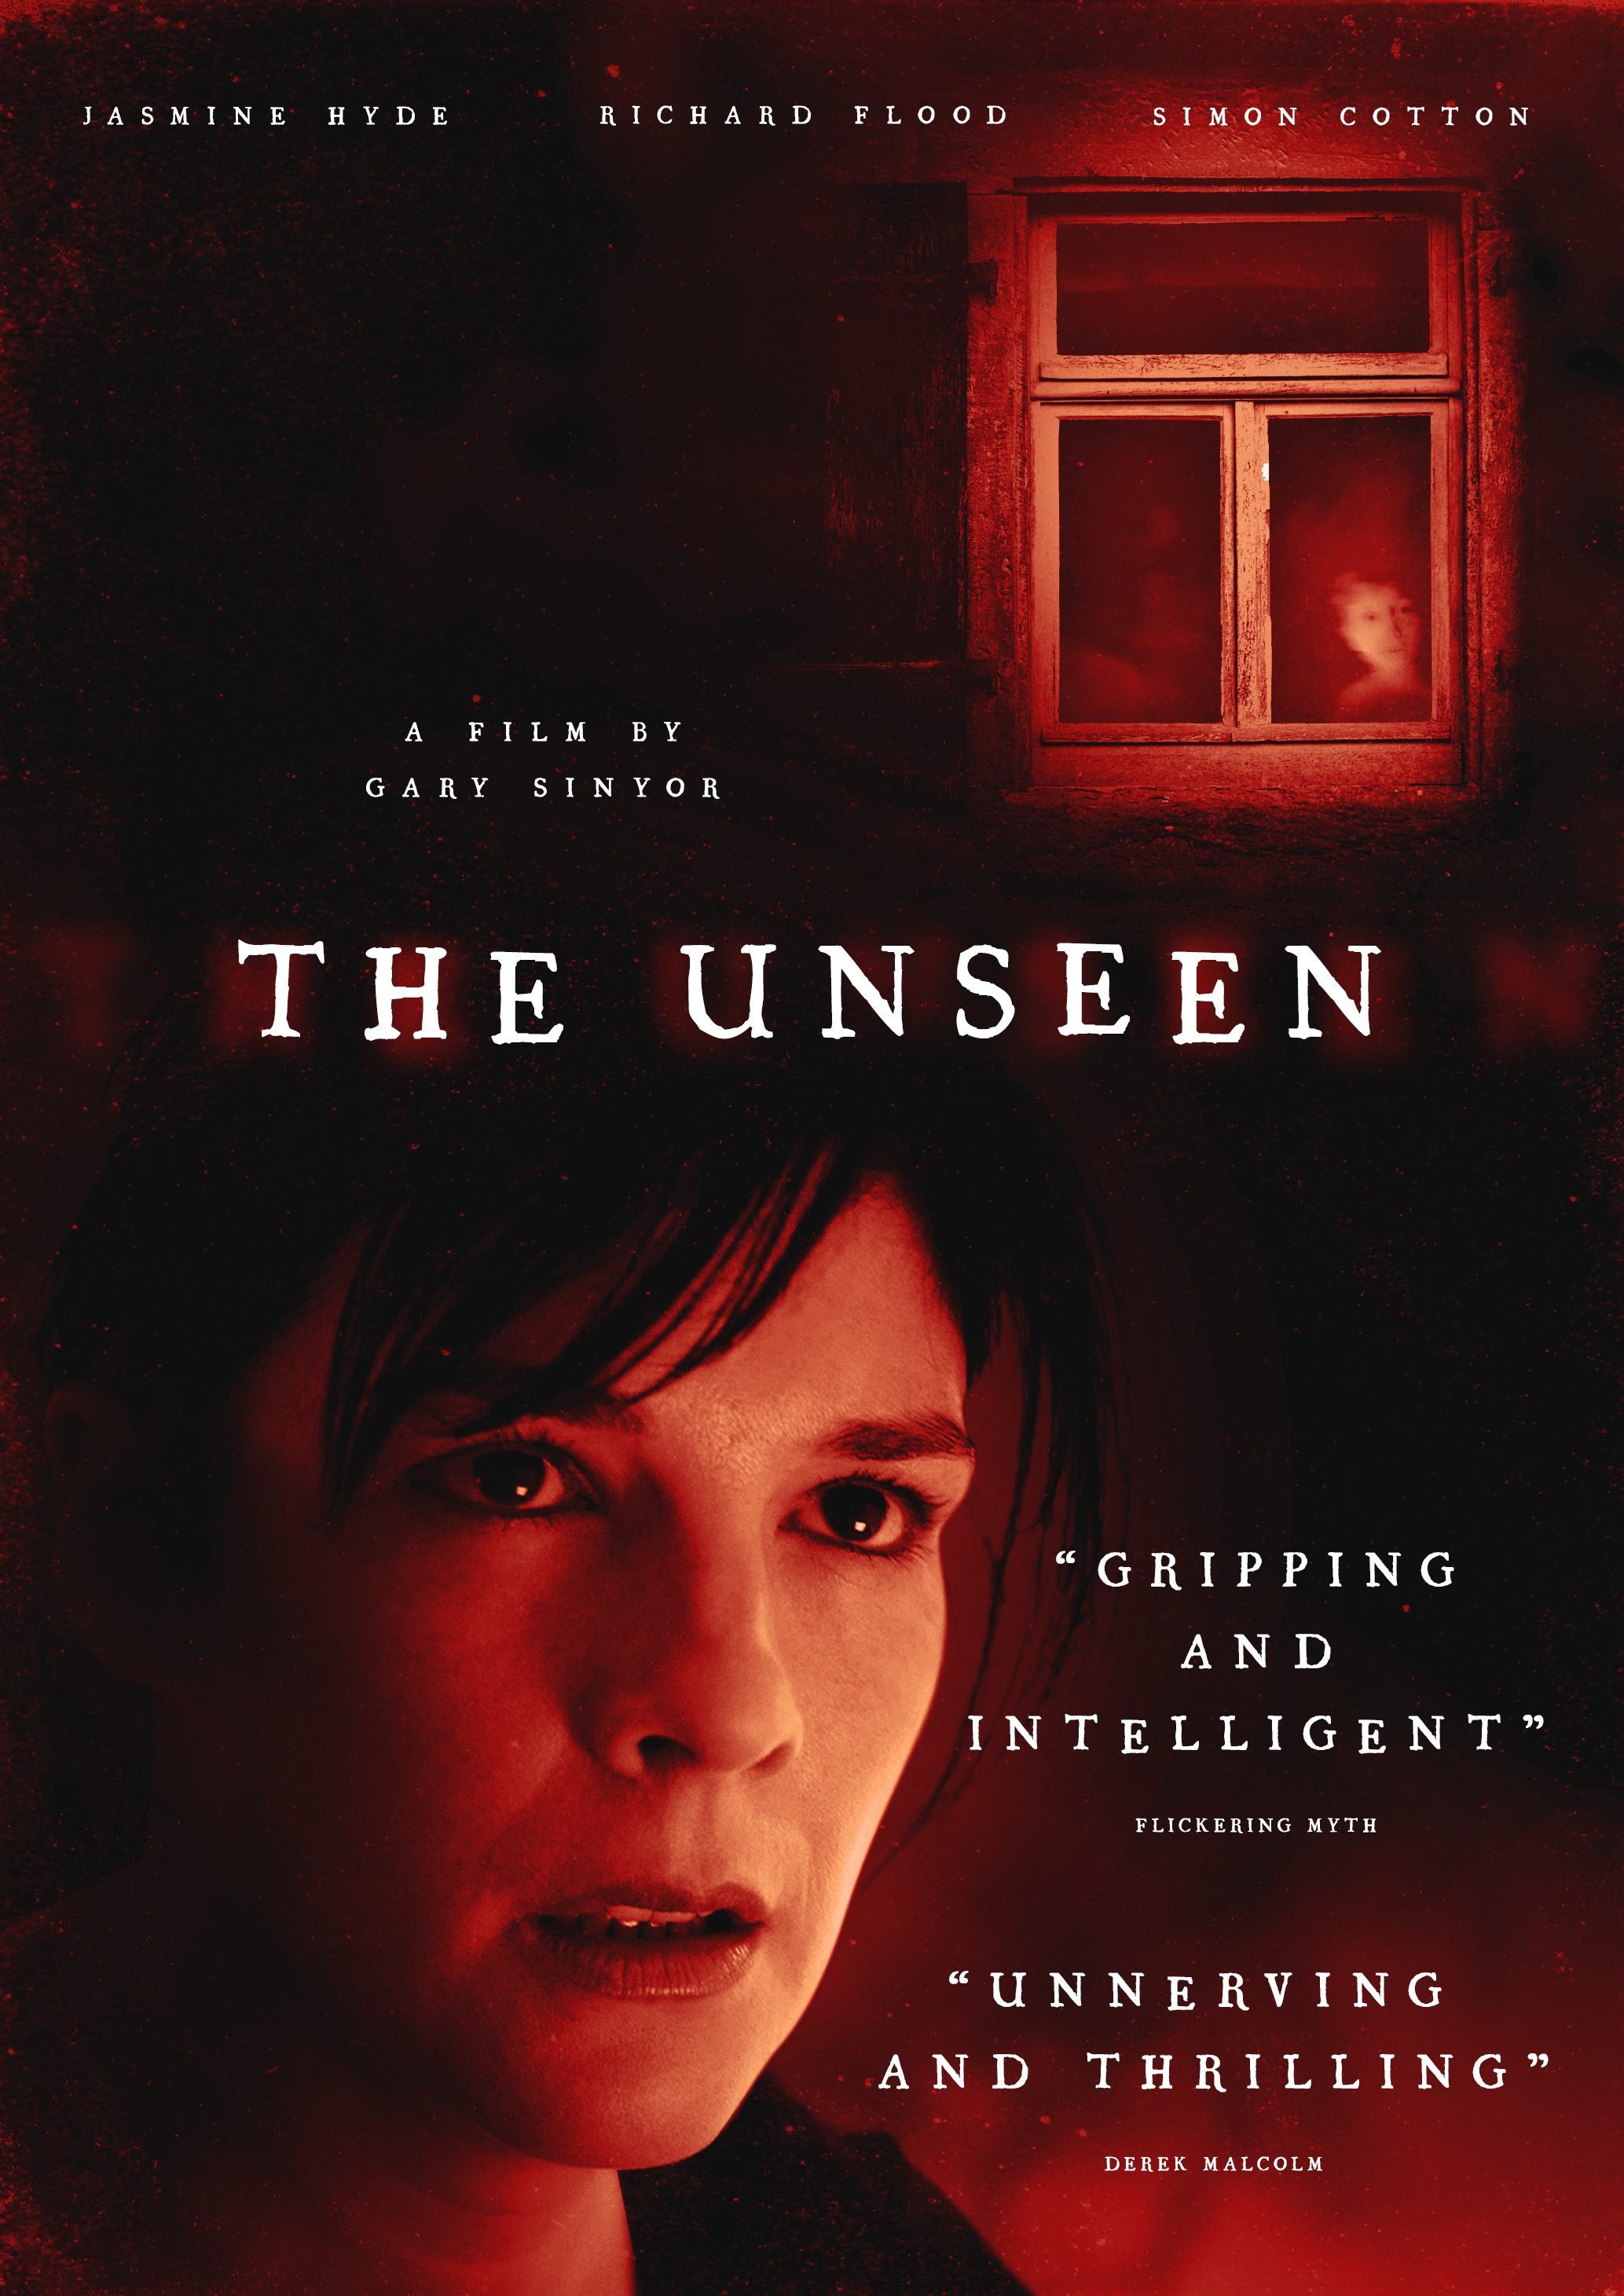 The Unseen film review: grief turns to horror